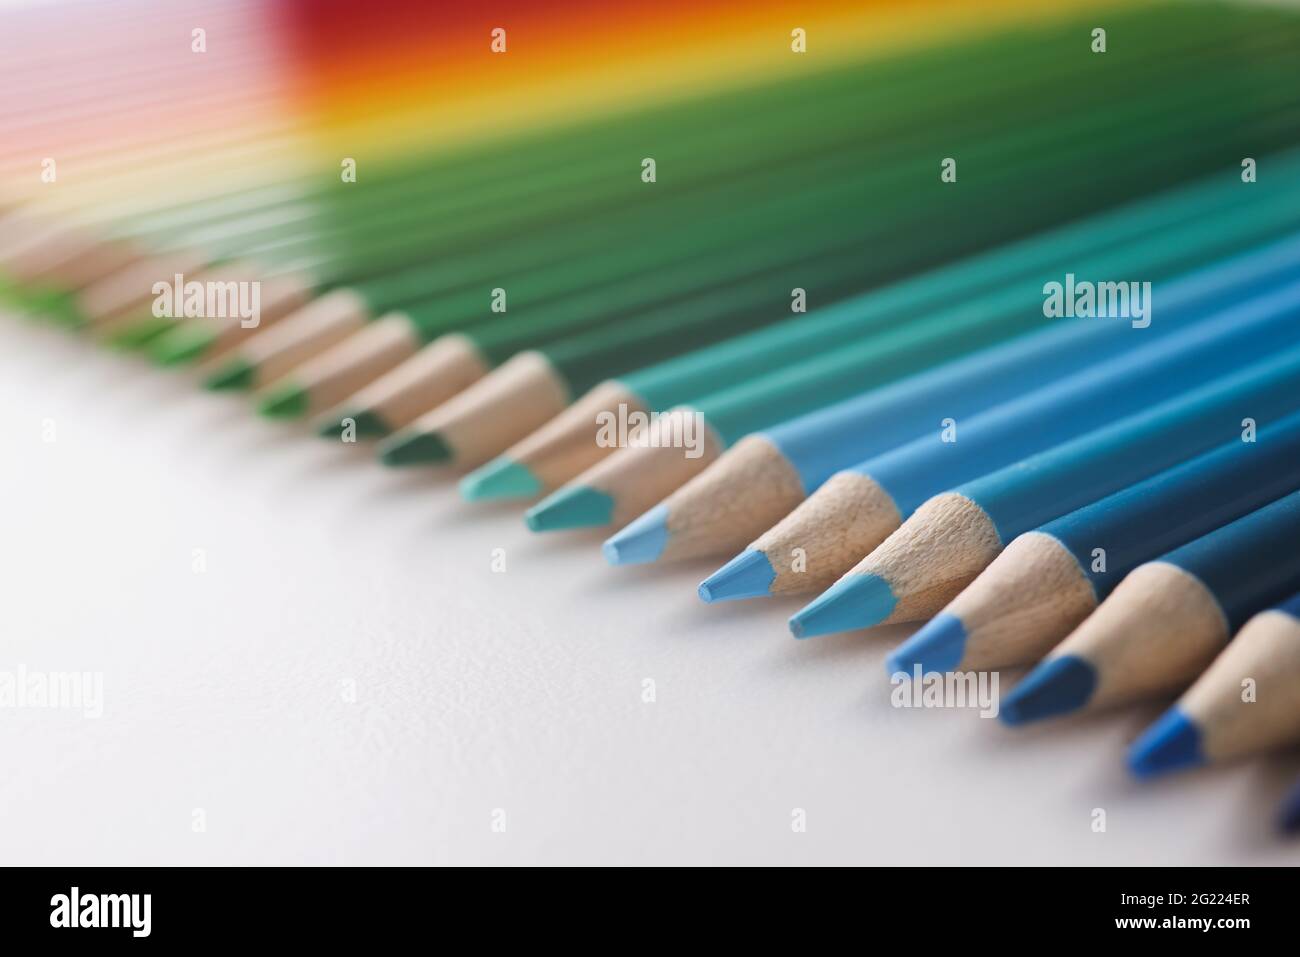 Many multi-colored pencils lying in colors of rainbow on white ...